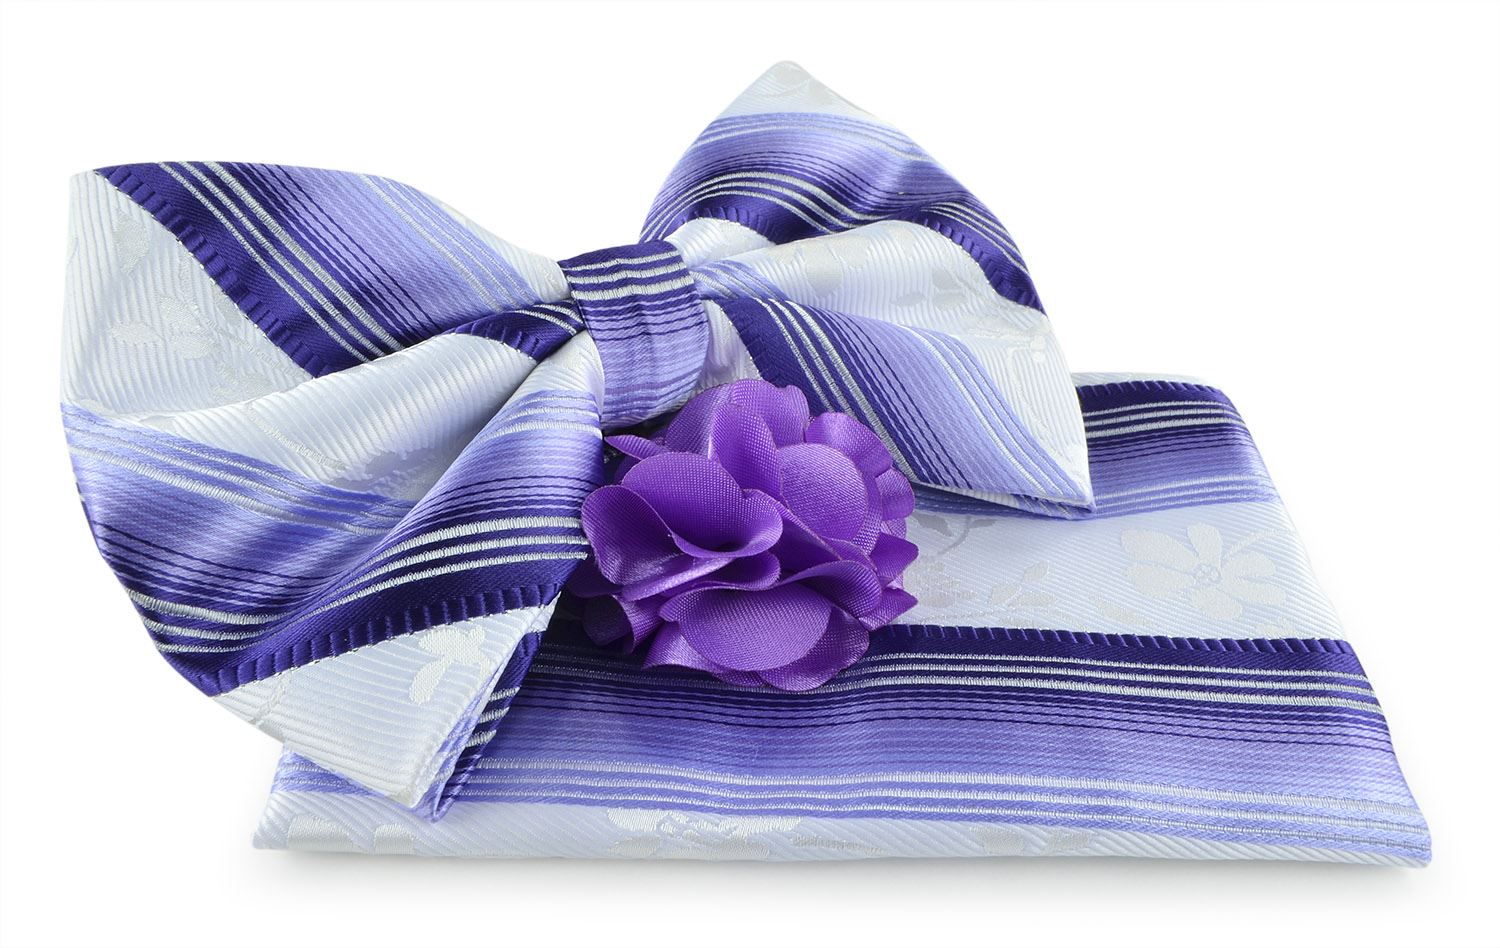 Uomo Vennetto Men's Purple and White Striped Bow Tie with Hanky and Lapel Flower